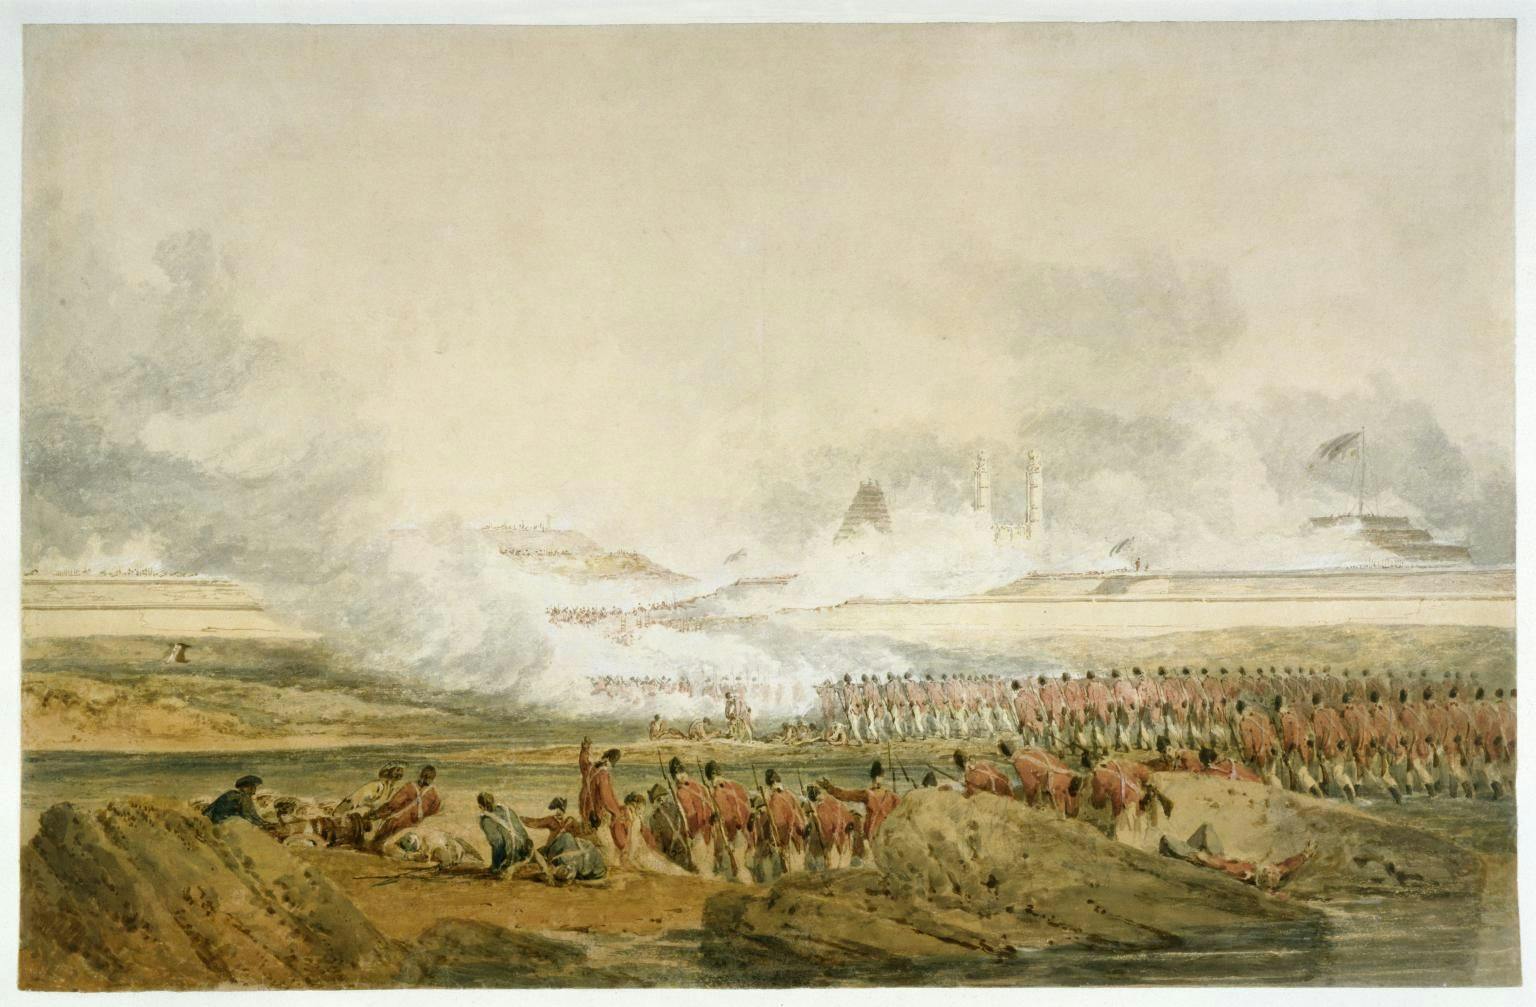 ‘The Siege of Seringapatam’, painting by Joseph Mallord William Turner, c.1800